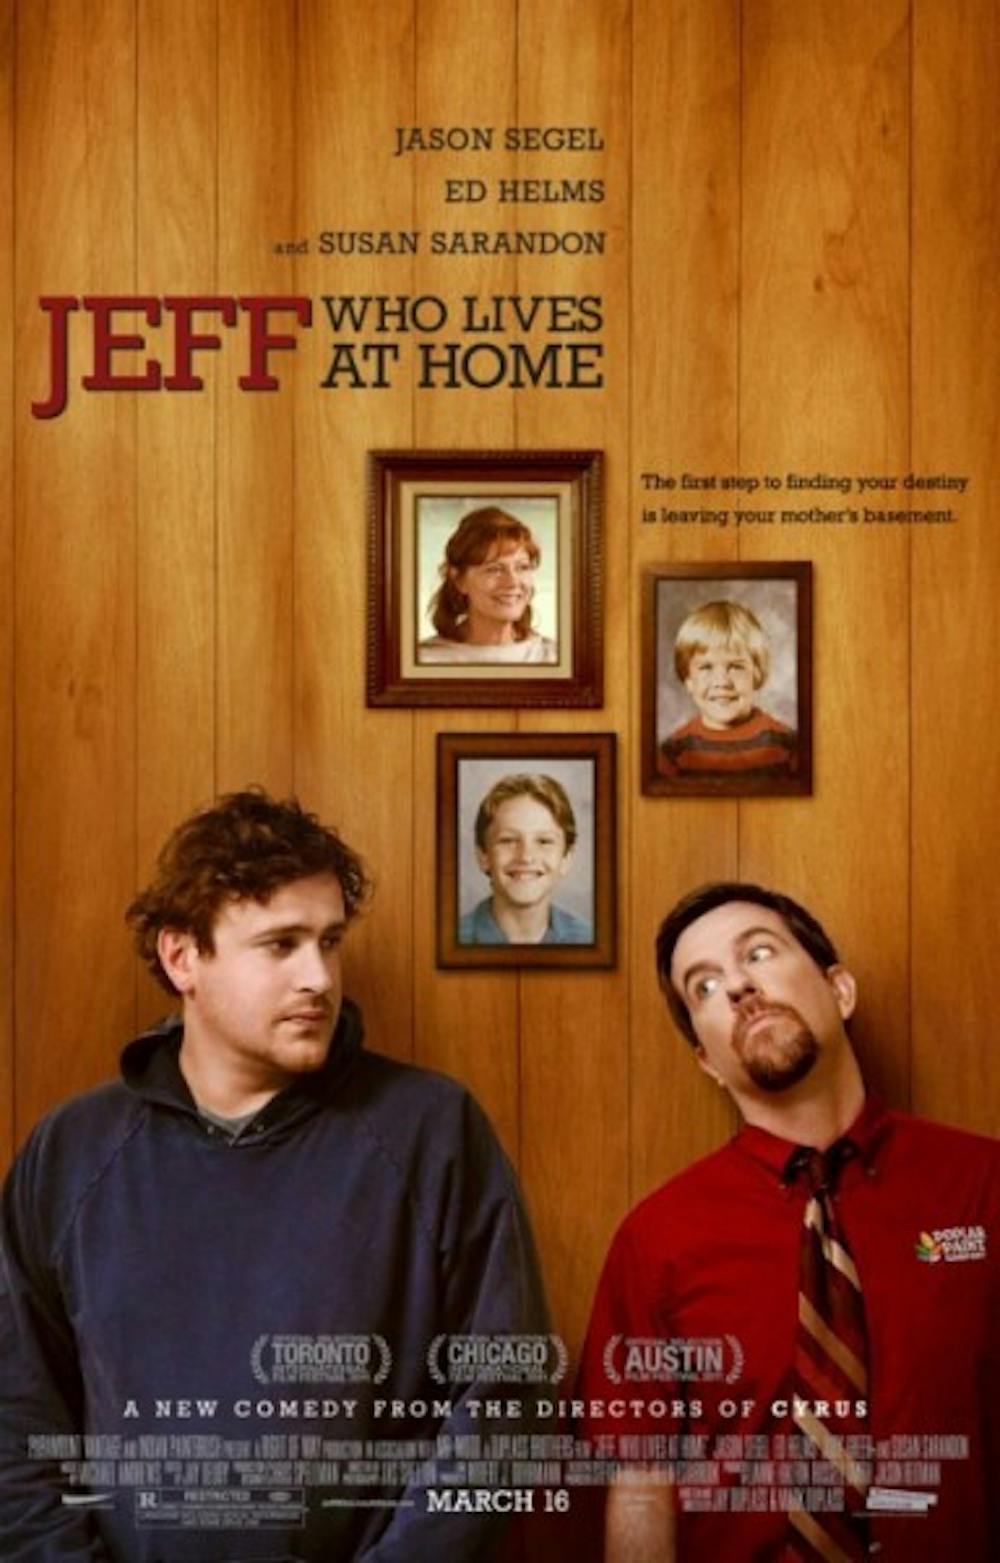 <p>Jason Segel brilliantly plays the naive slacker, Jeff, who is on a mission to pursue his destiny through a series of unlikely signs.</p>